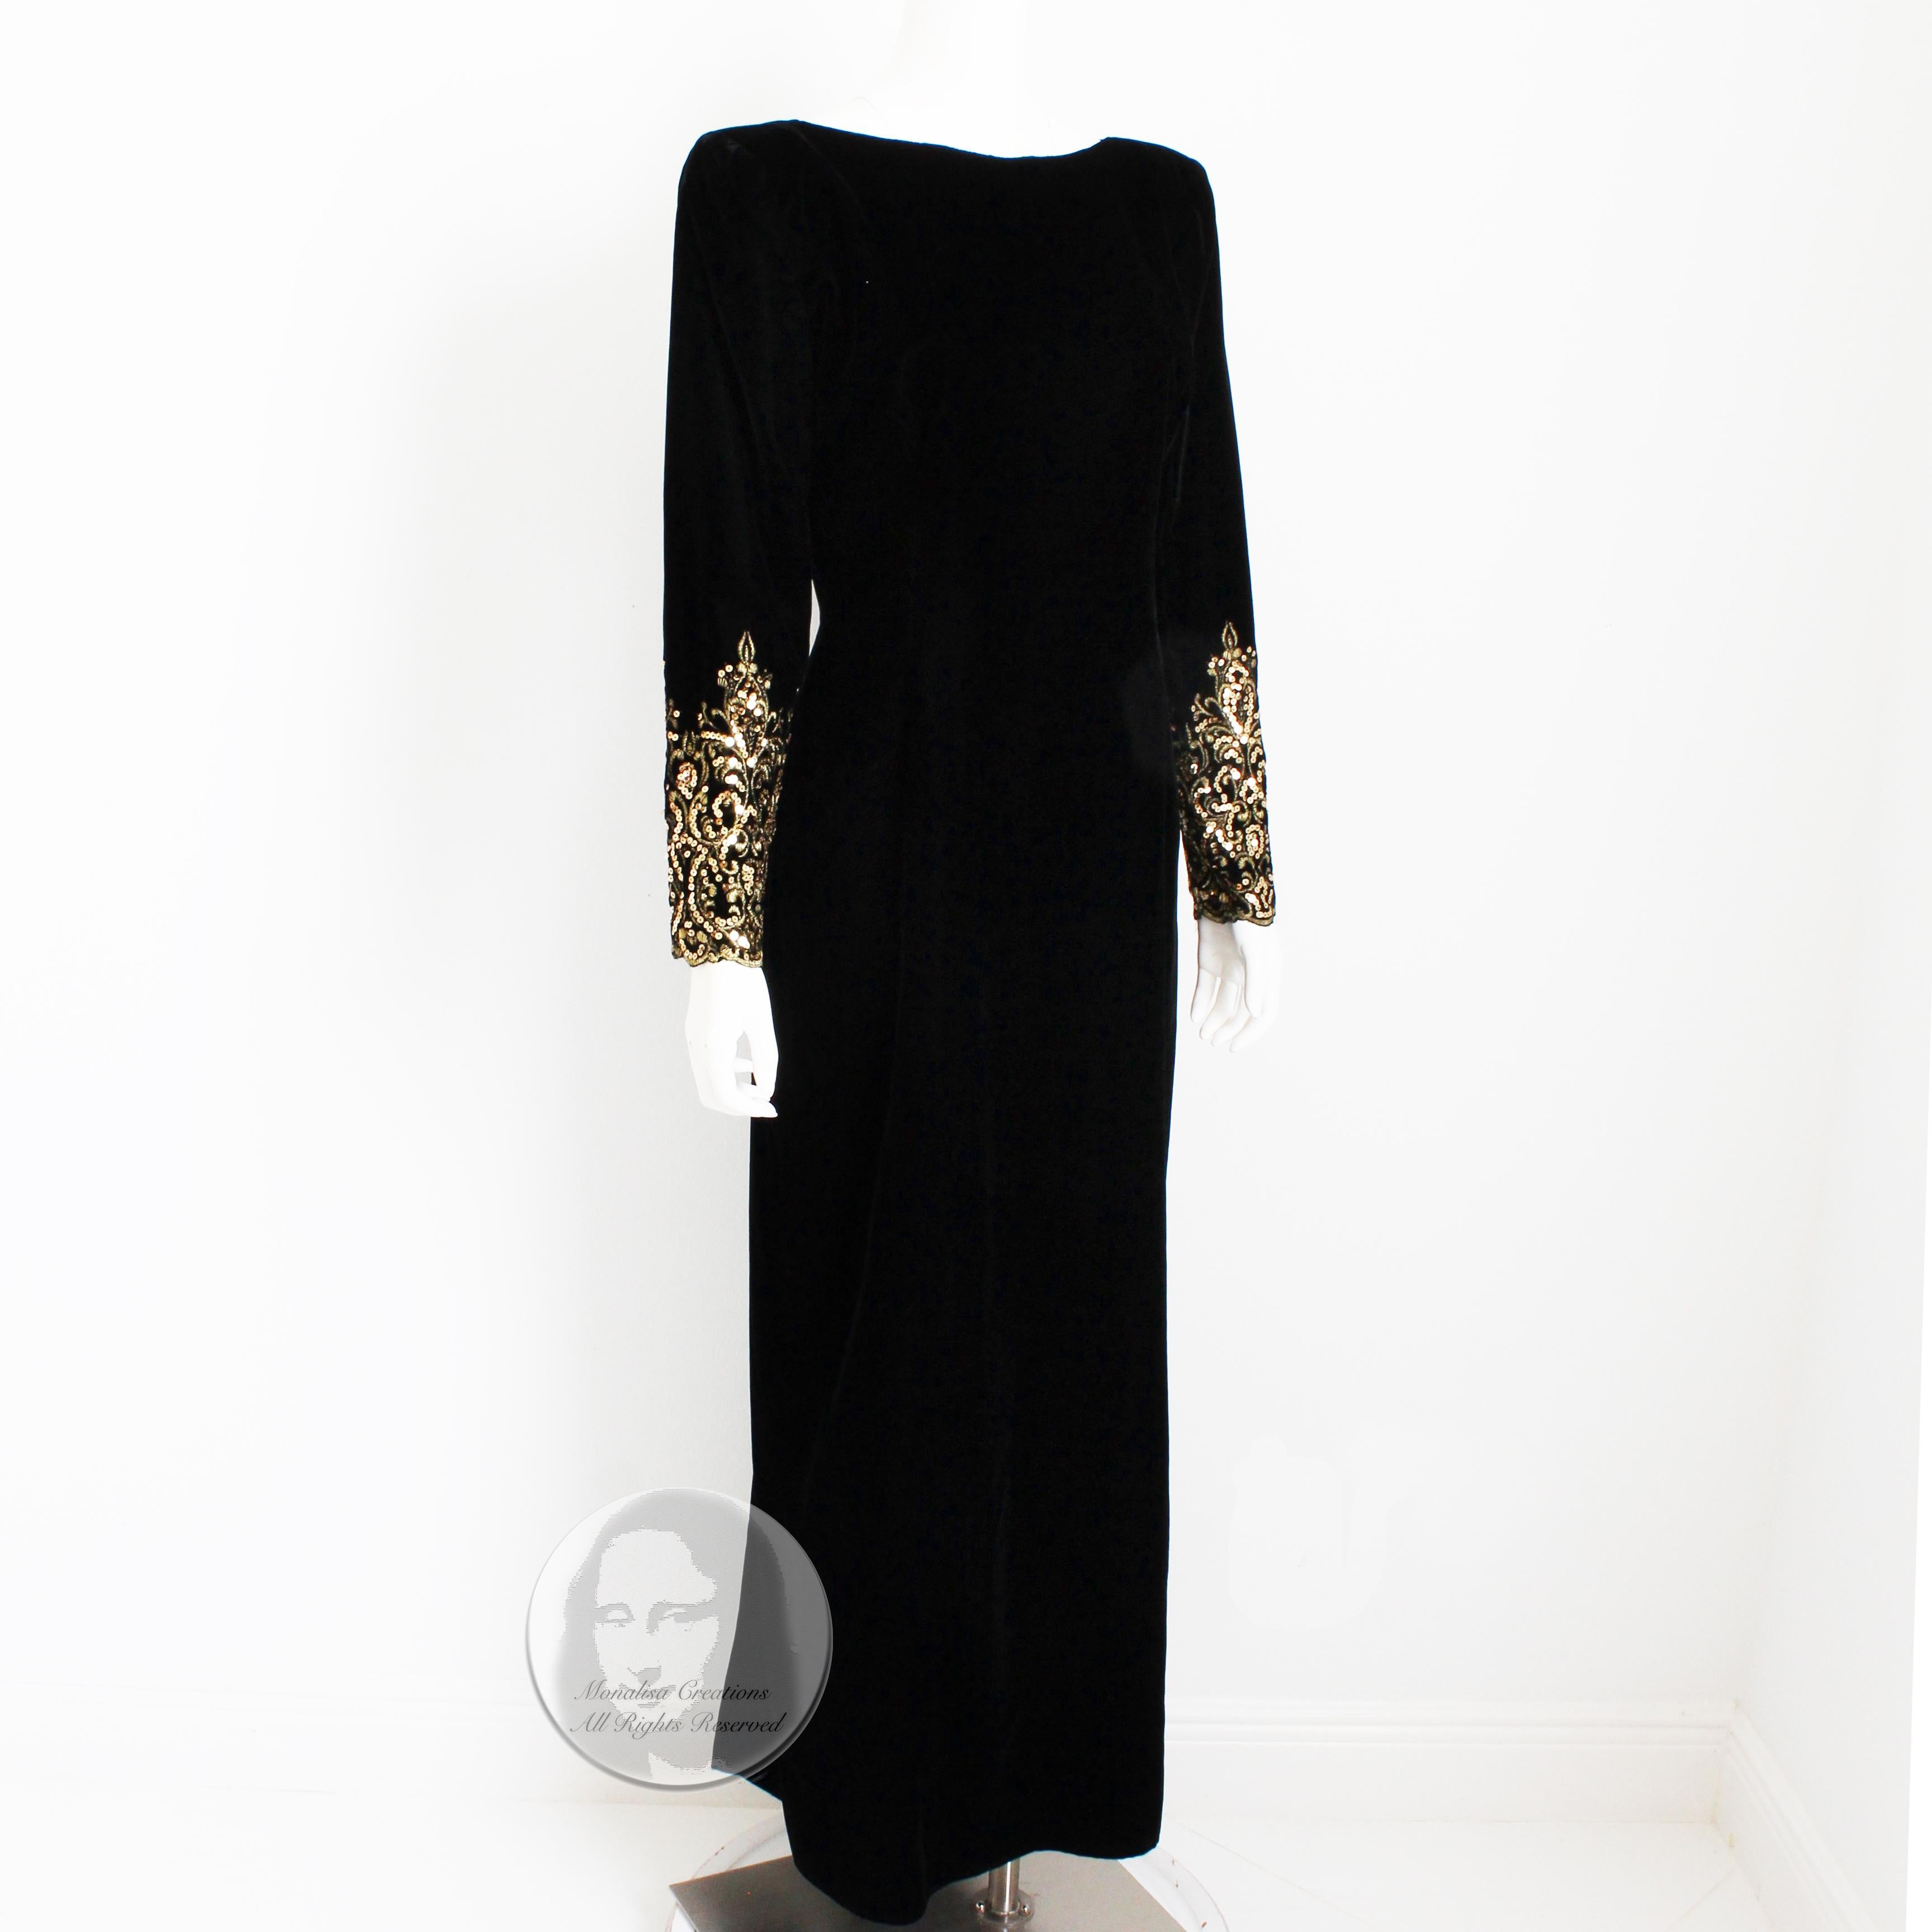 Authentic, preowned, vintage Victor Costa evening gown, likely made in the 90s. Made from black velvet, it features gorgeous embellished sleeves and a plunging back - sexy and chic! Fastens with zipper in back and has a slight train to the back hem.